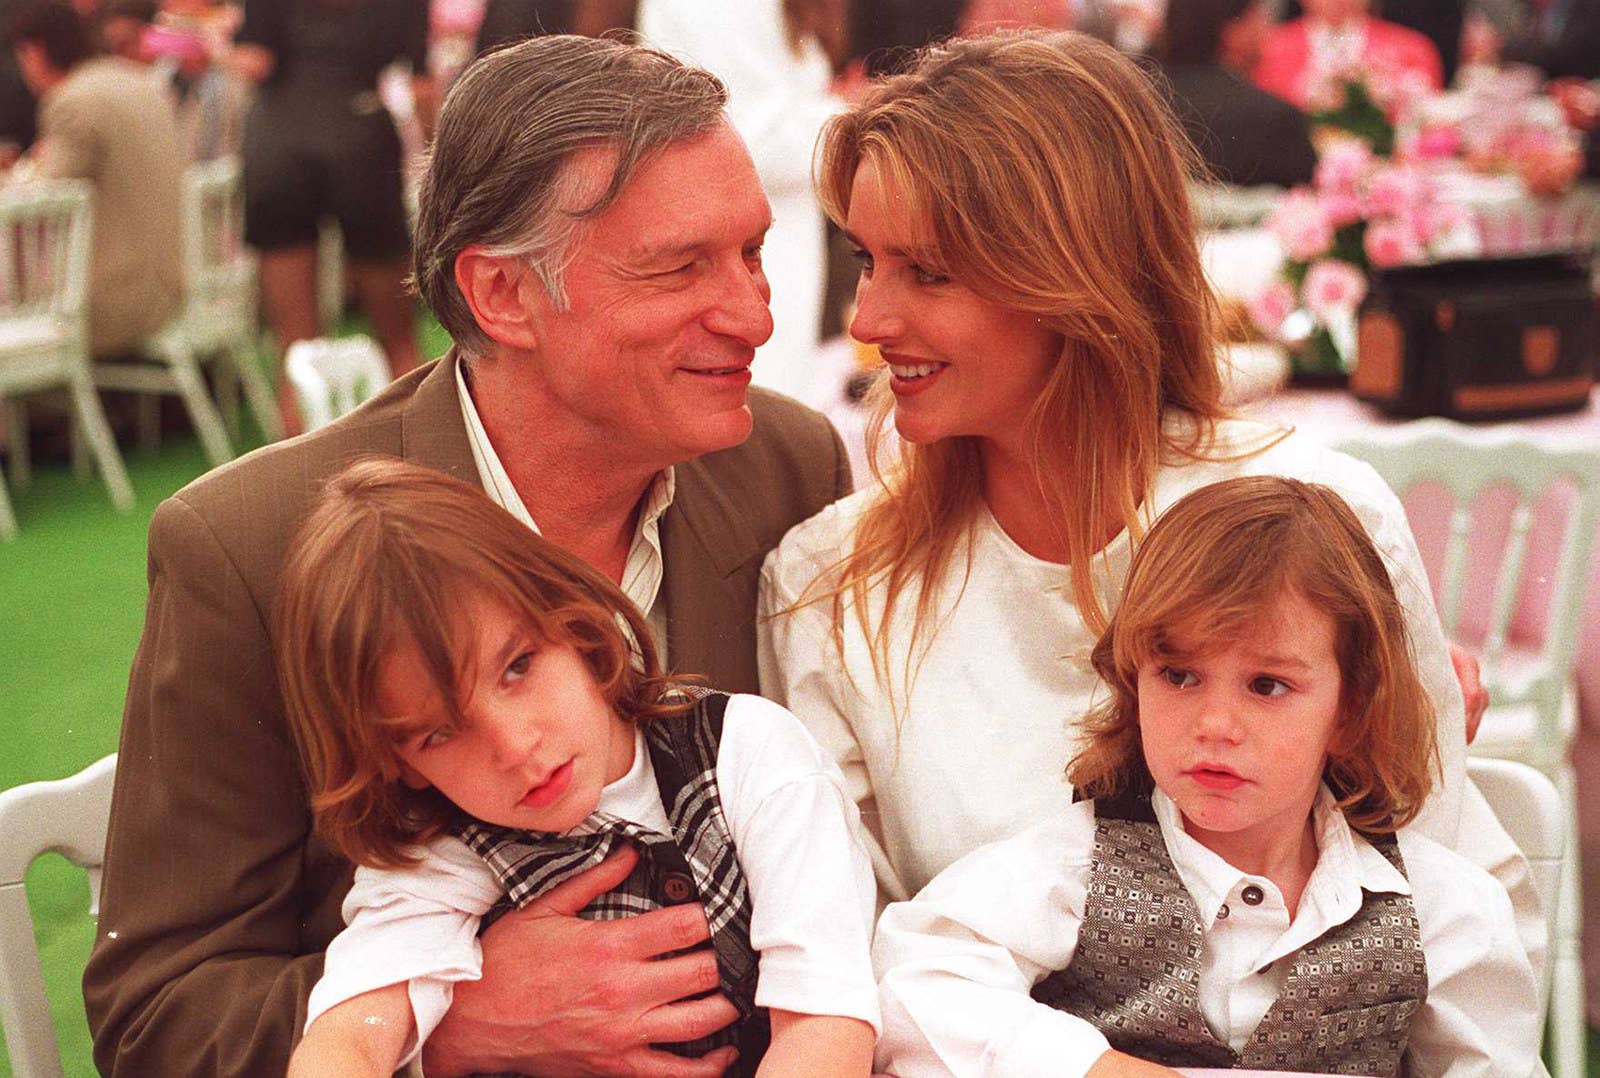 Hefner sits with his wife Kimberley and two children during an event at the Playboy Mansion in April 1994.